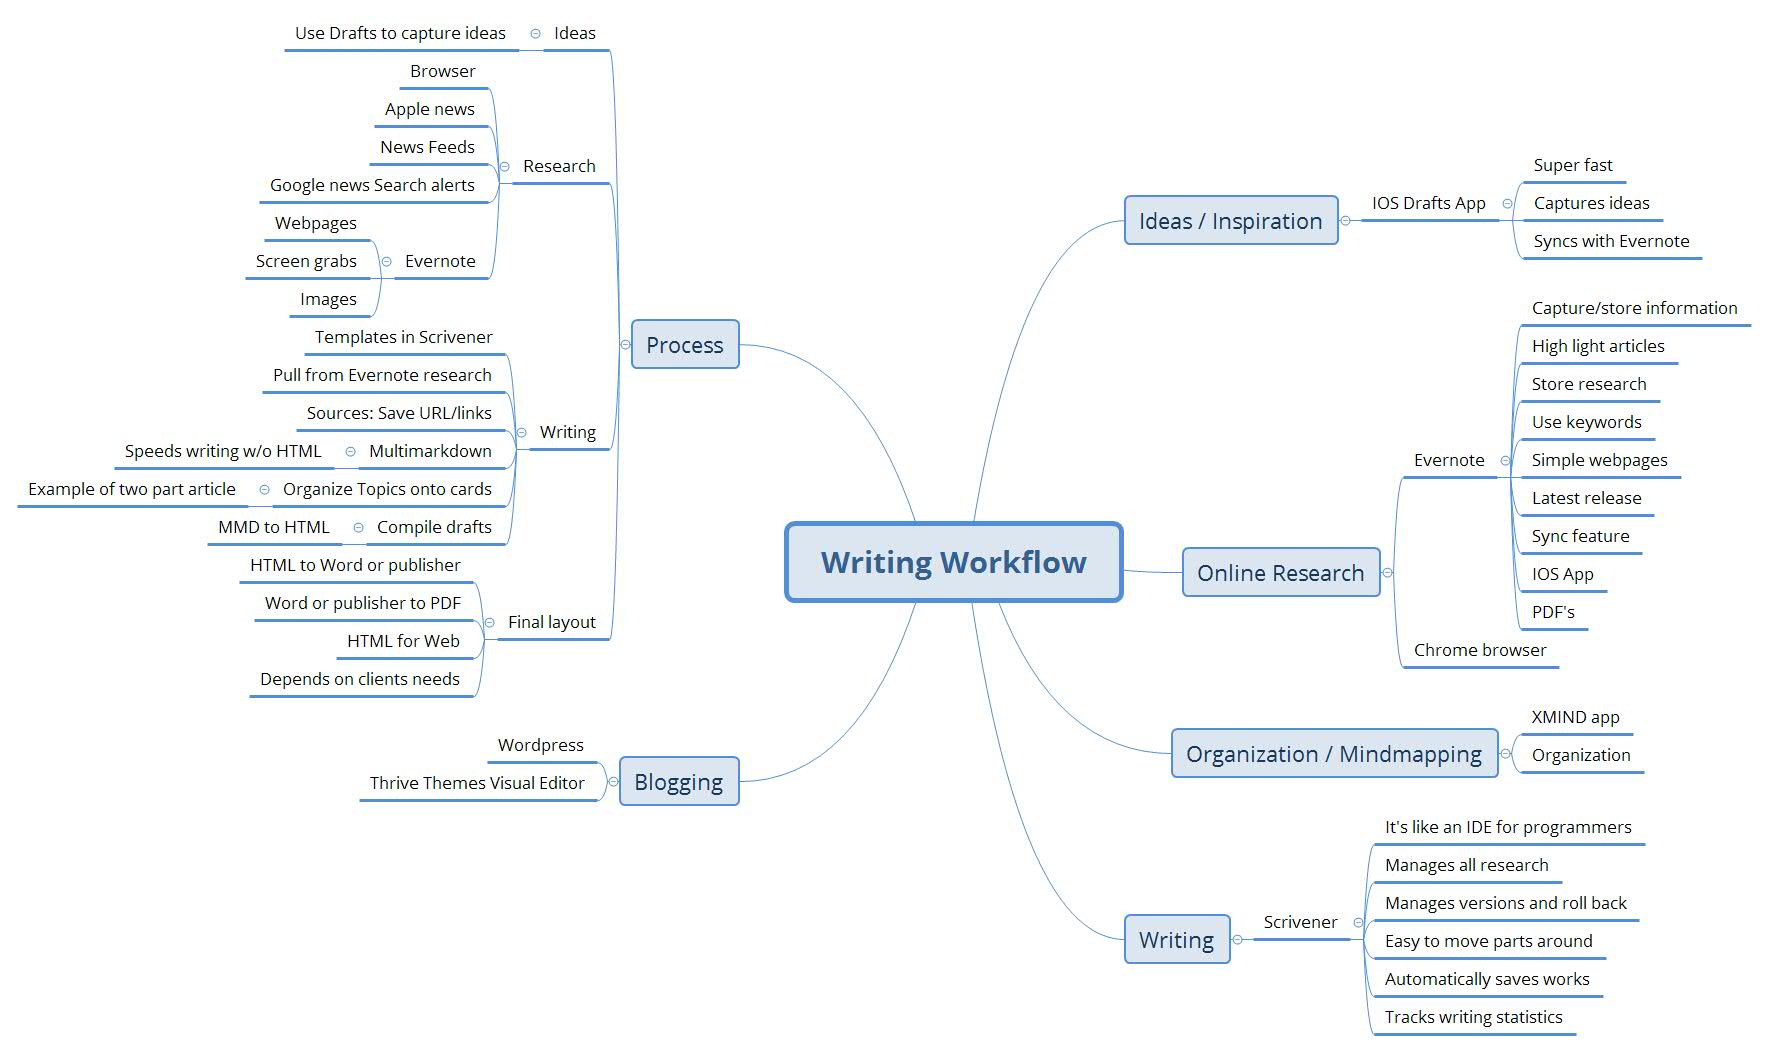 Workflow from XMIND software